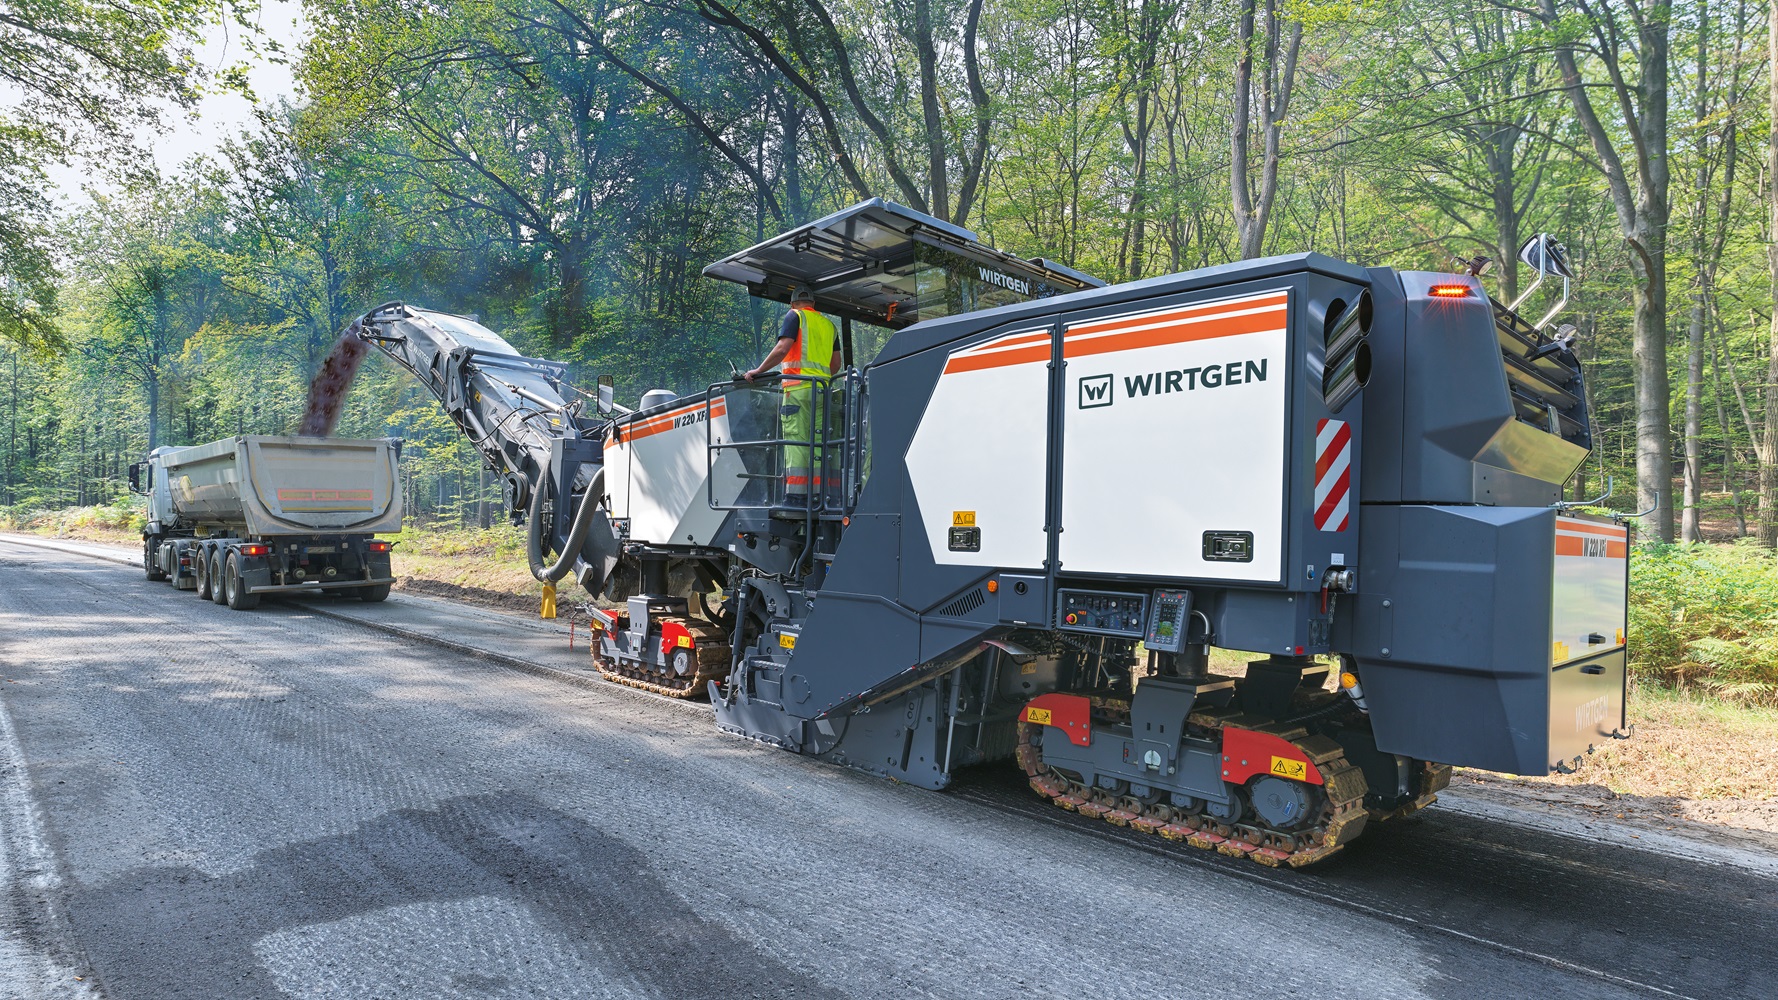 The W 220 XFi cold milling machine from Wirtgen offers high productivity and low specific carbon emissions in all applications.